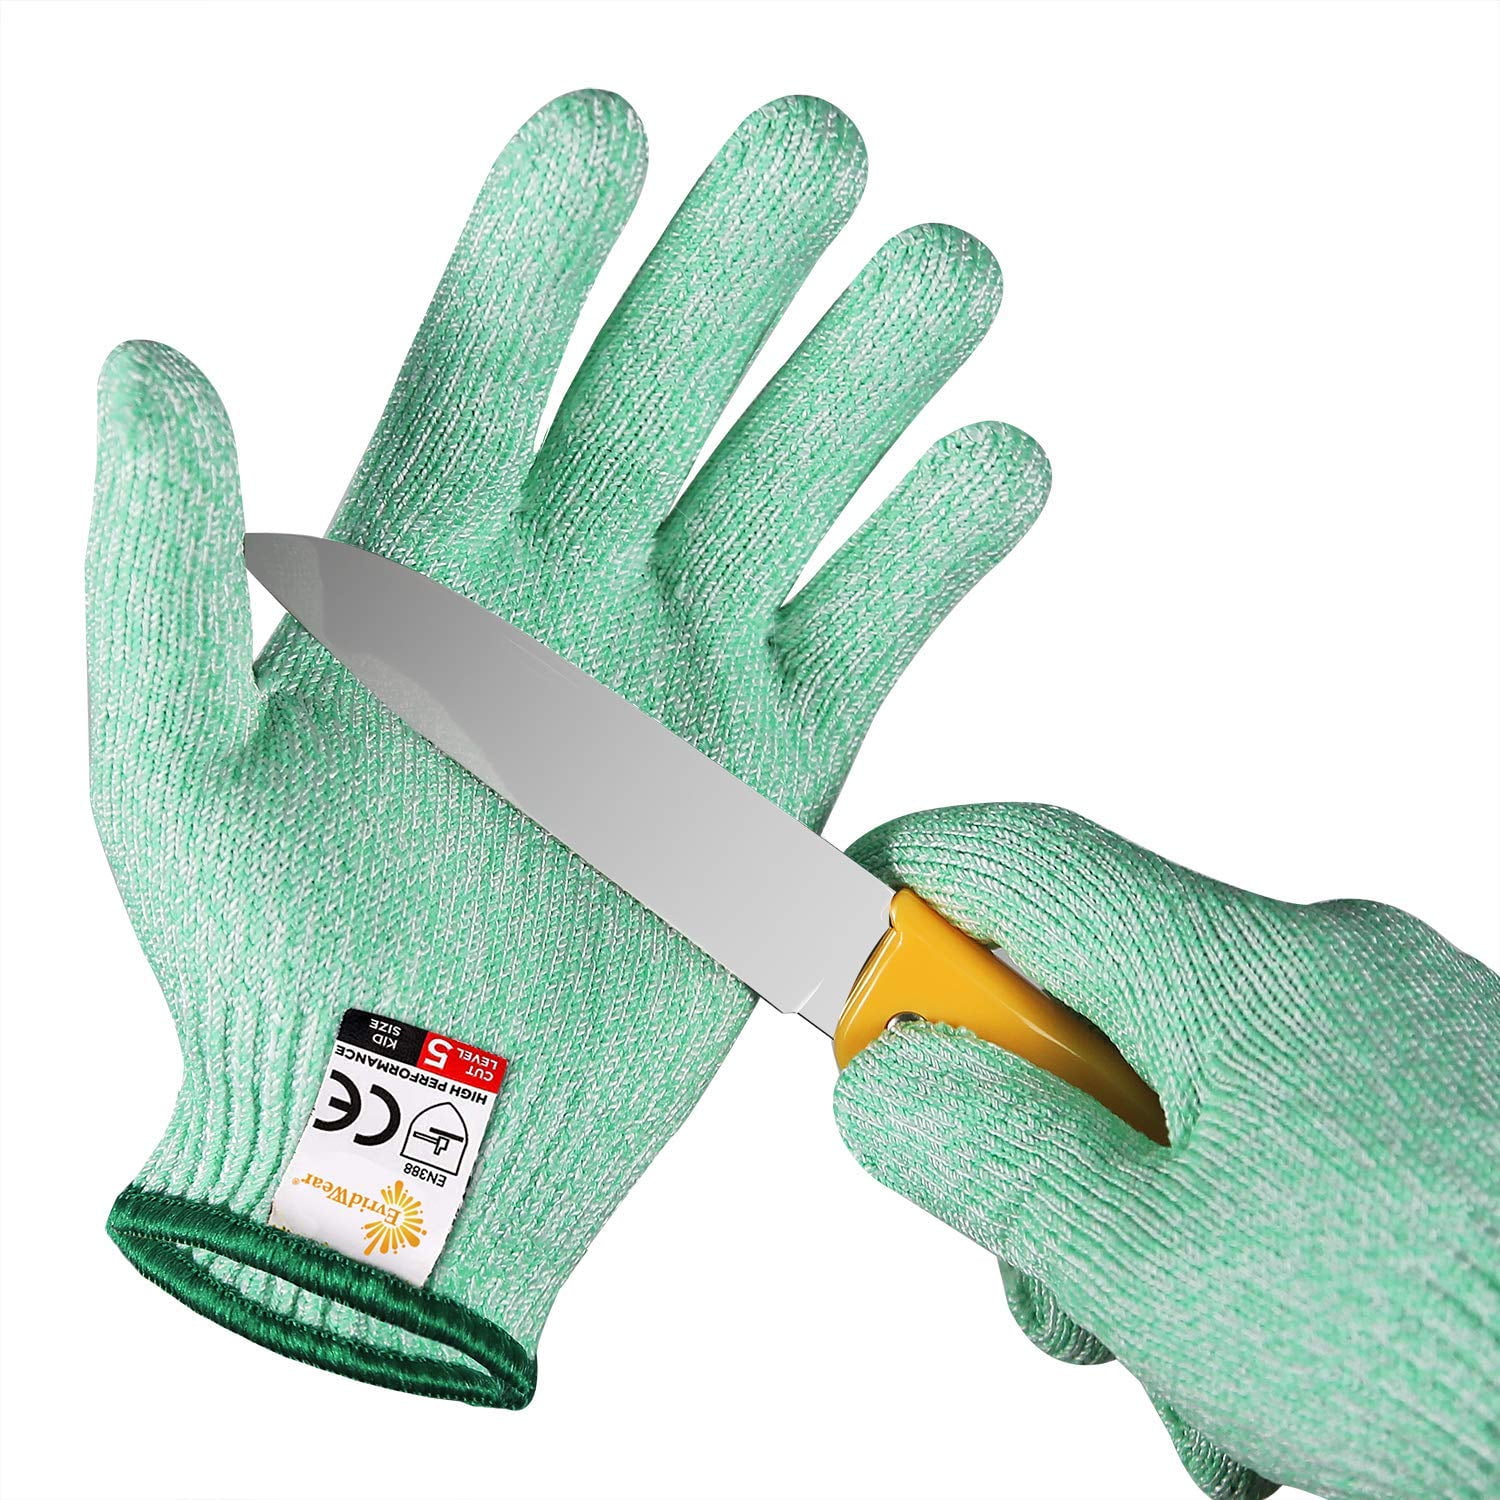 HereToGear Cut Resistant Gloves Xs